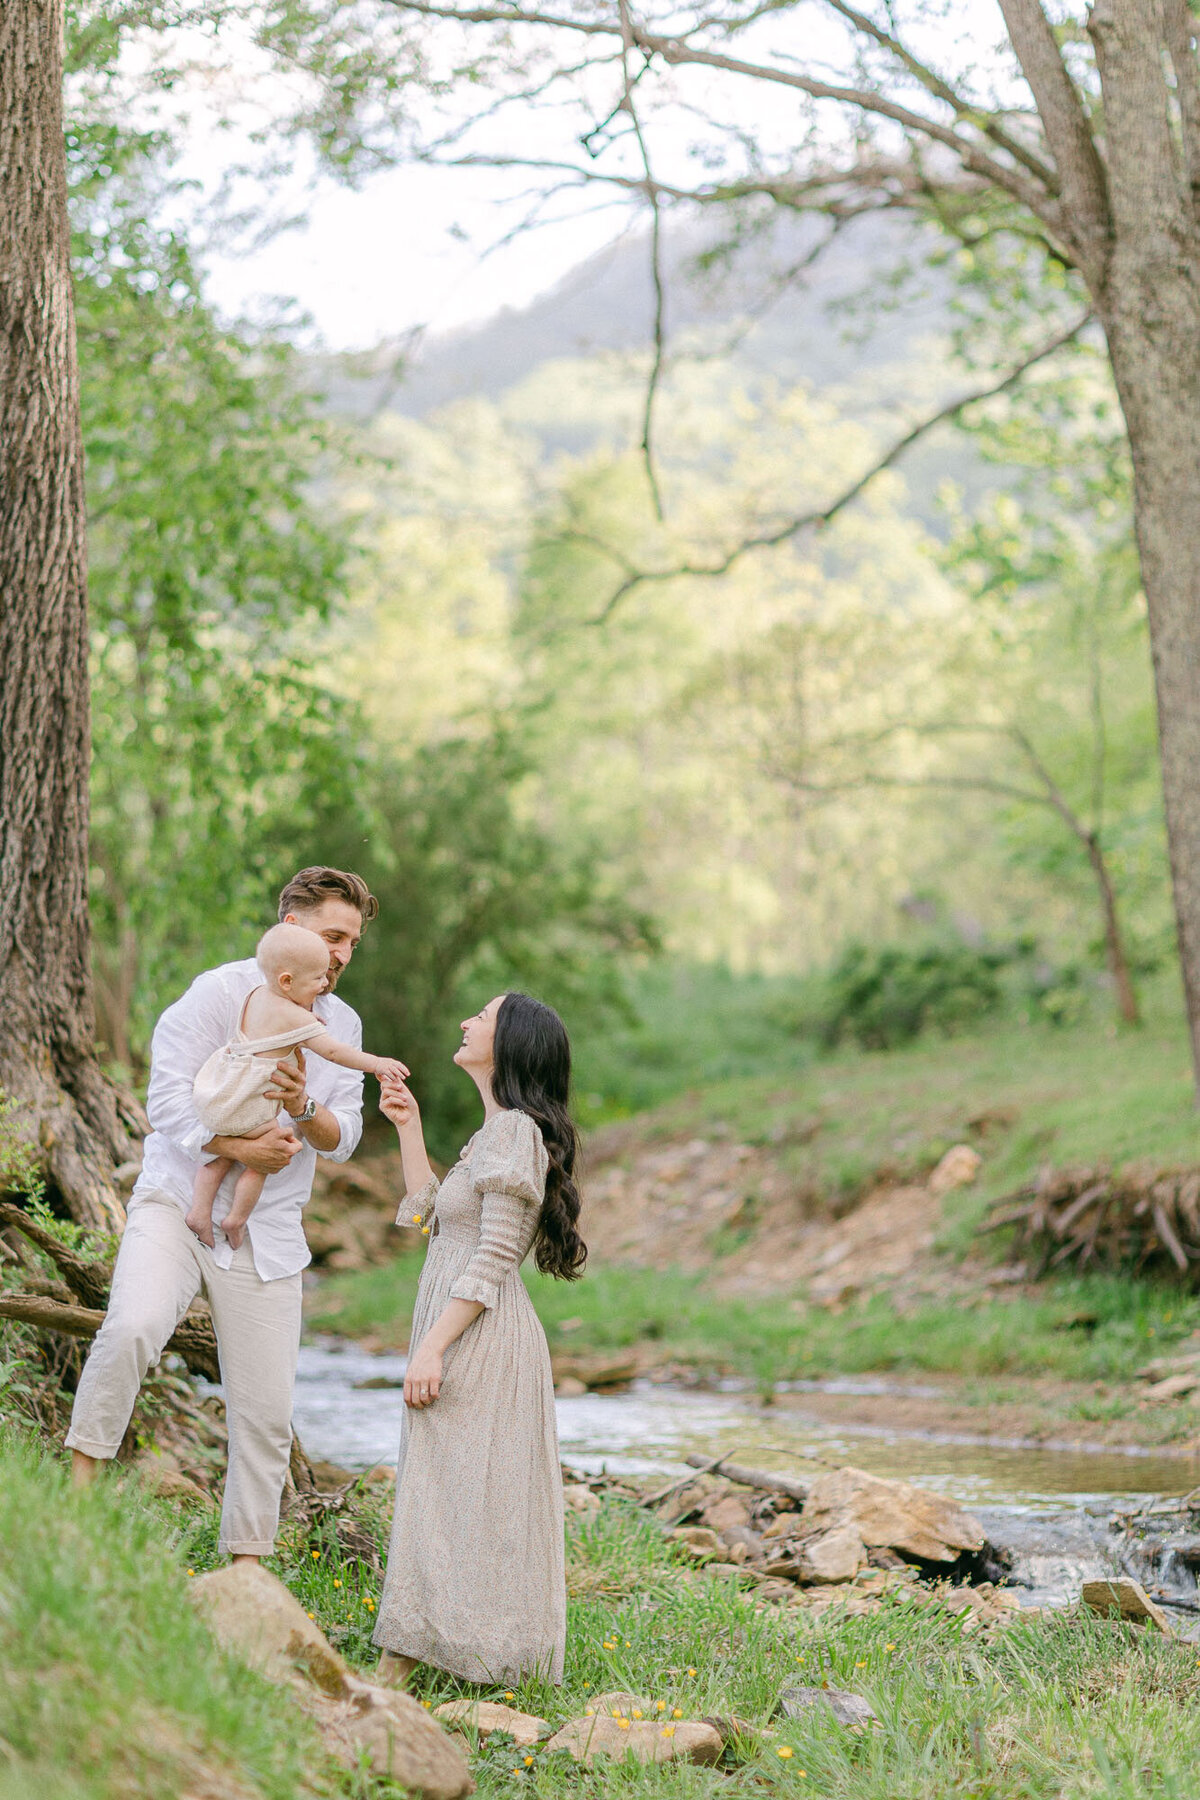 ellen-wagner-photo-lily-and-david-family-session-2-17